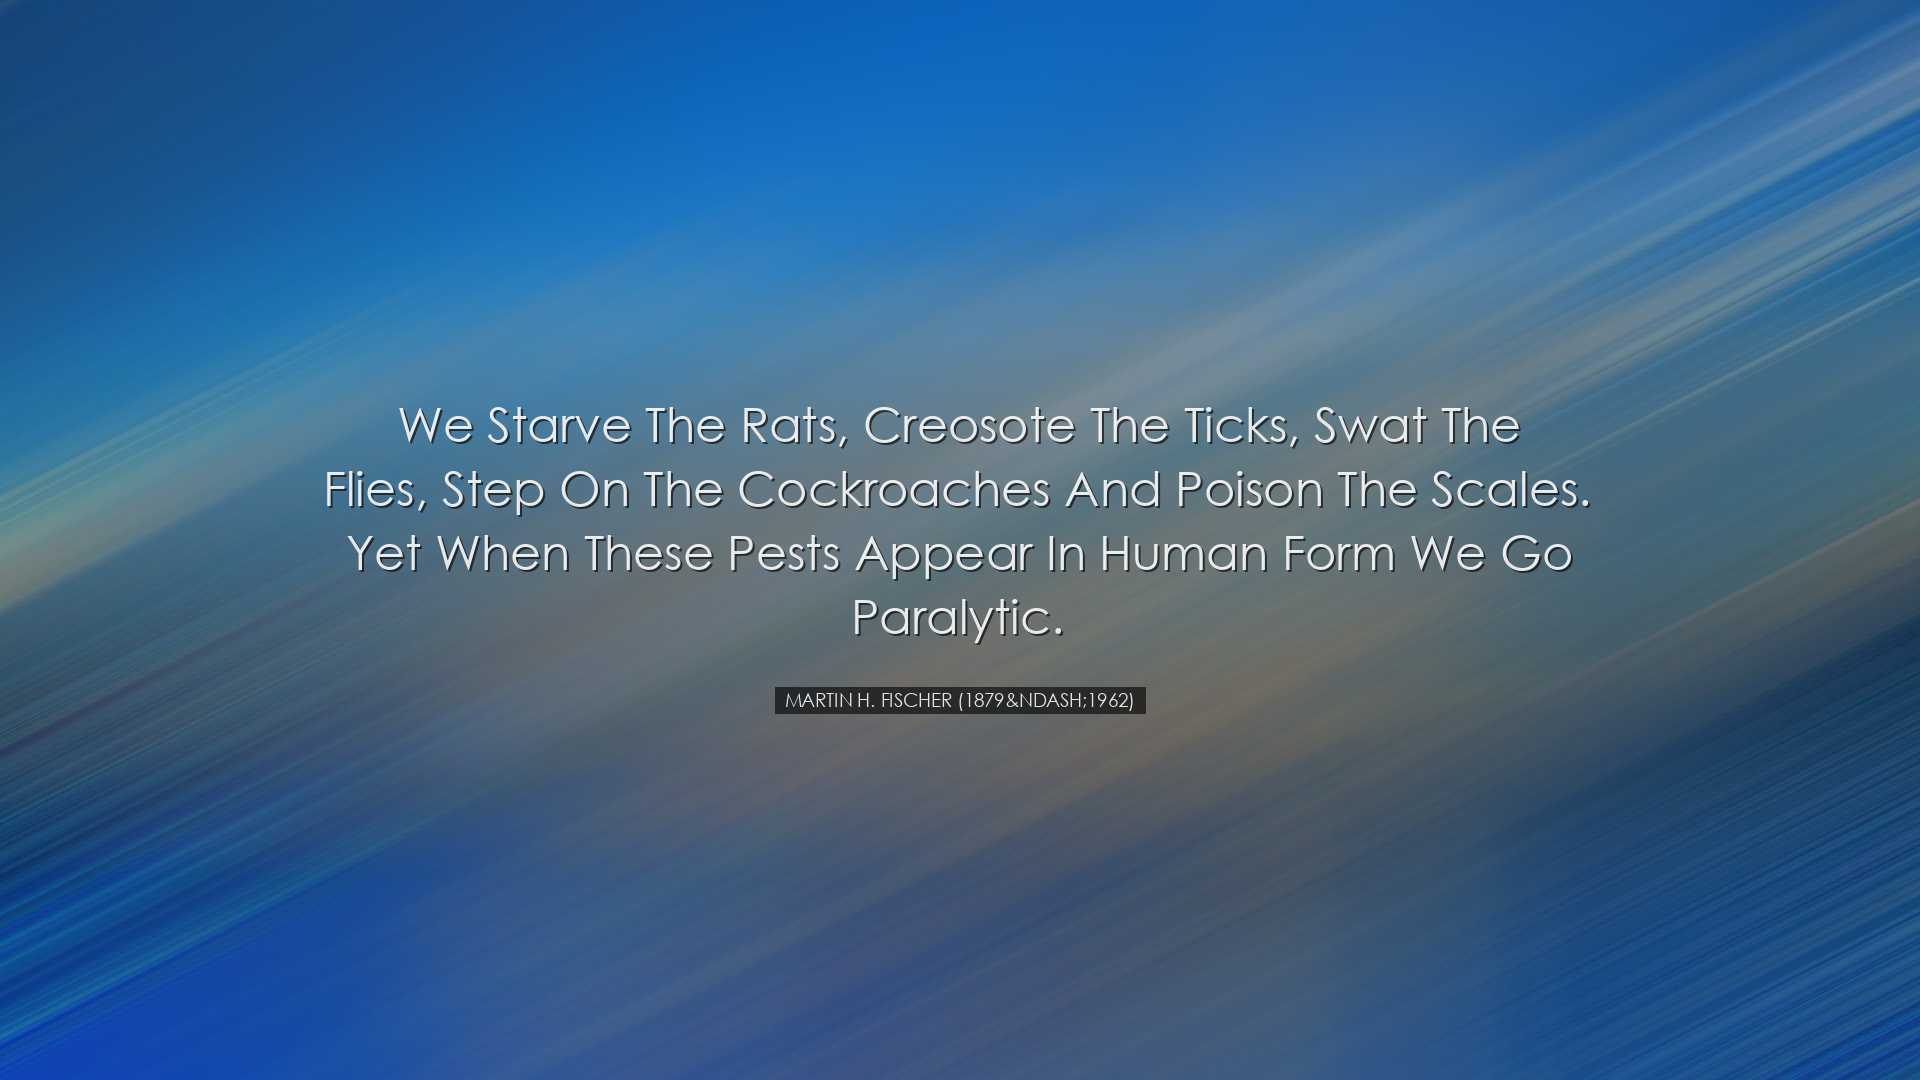 We starve the rats, creosote the ticks, swat the flies, step on th